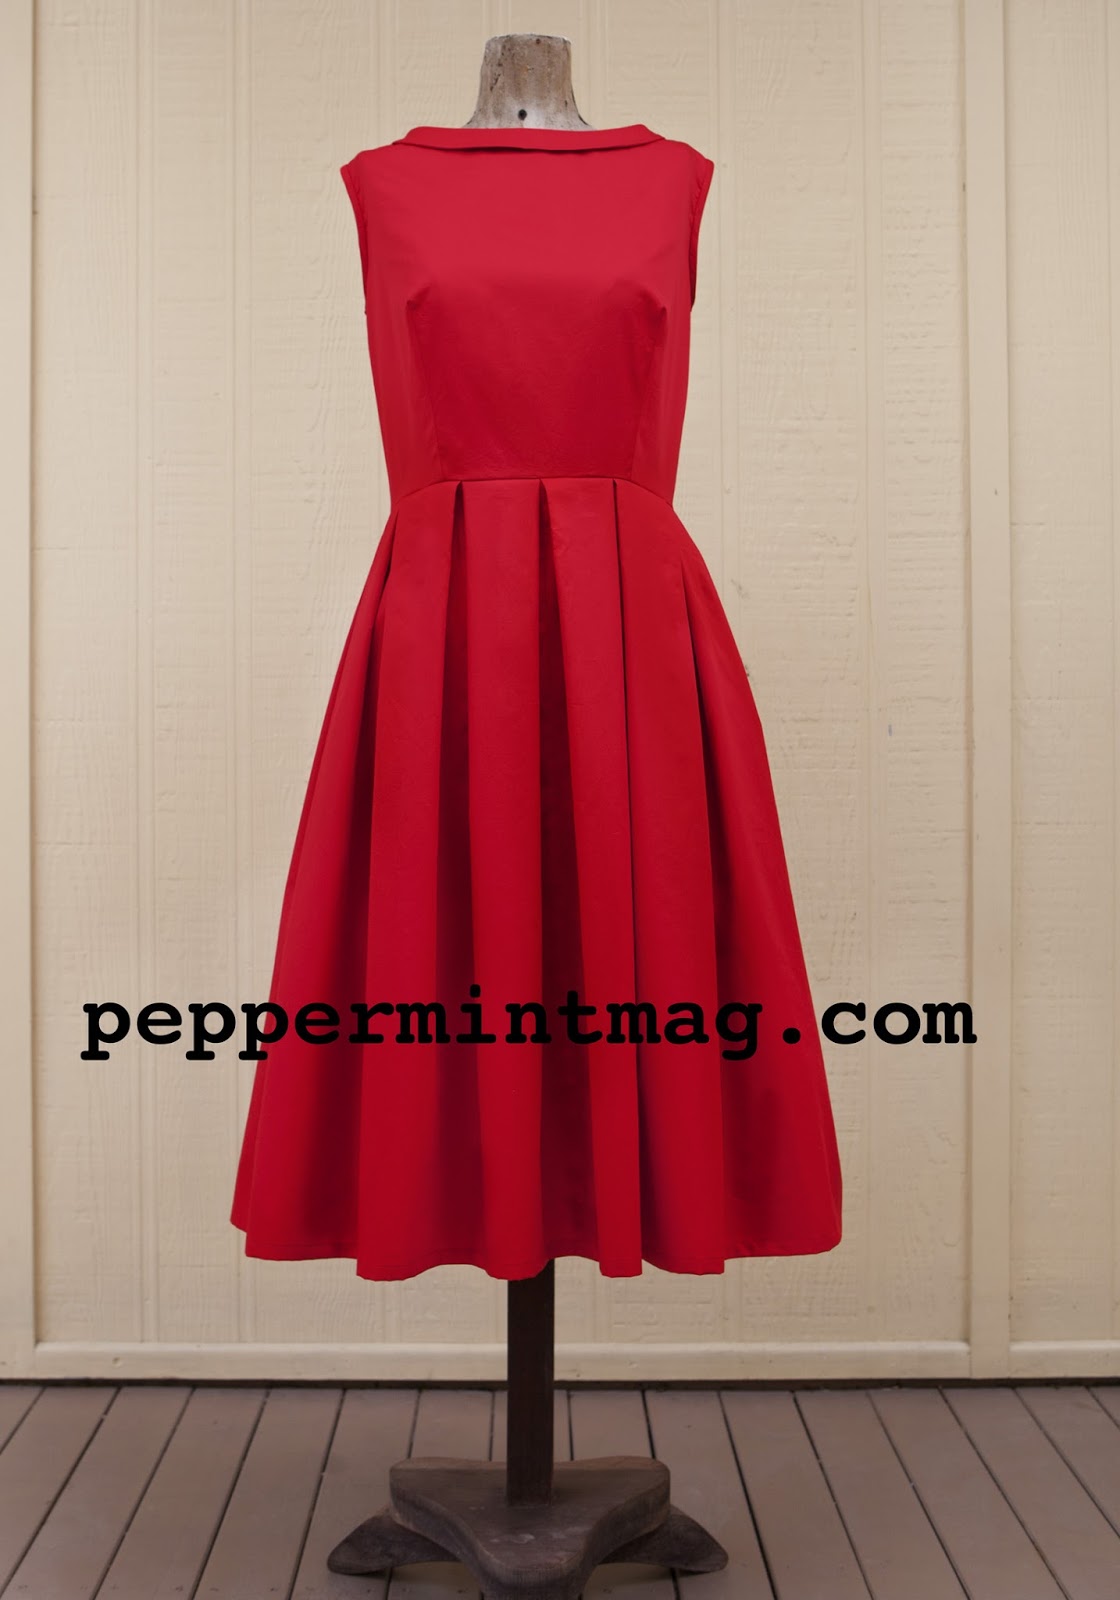 Free 1950's Sewing Pattern - Pleated Prom Dress